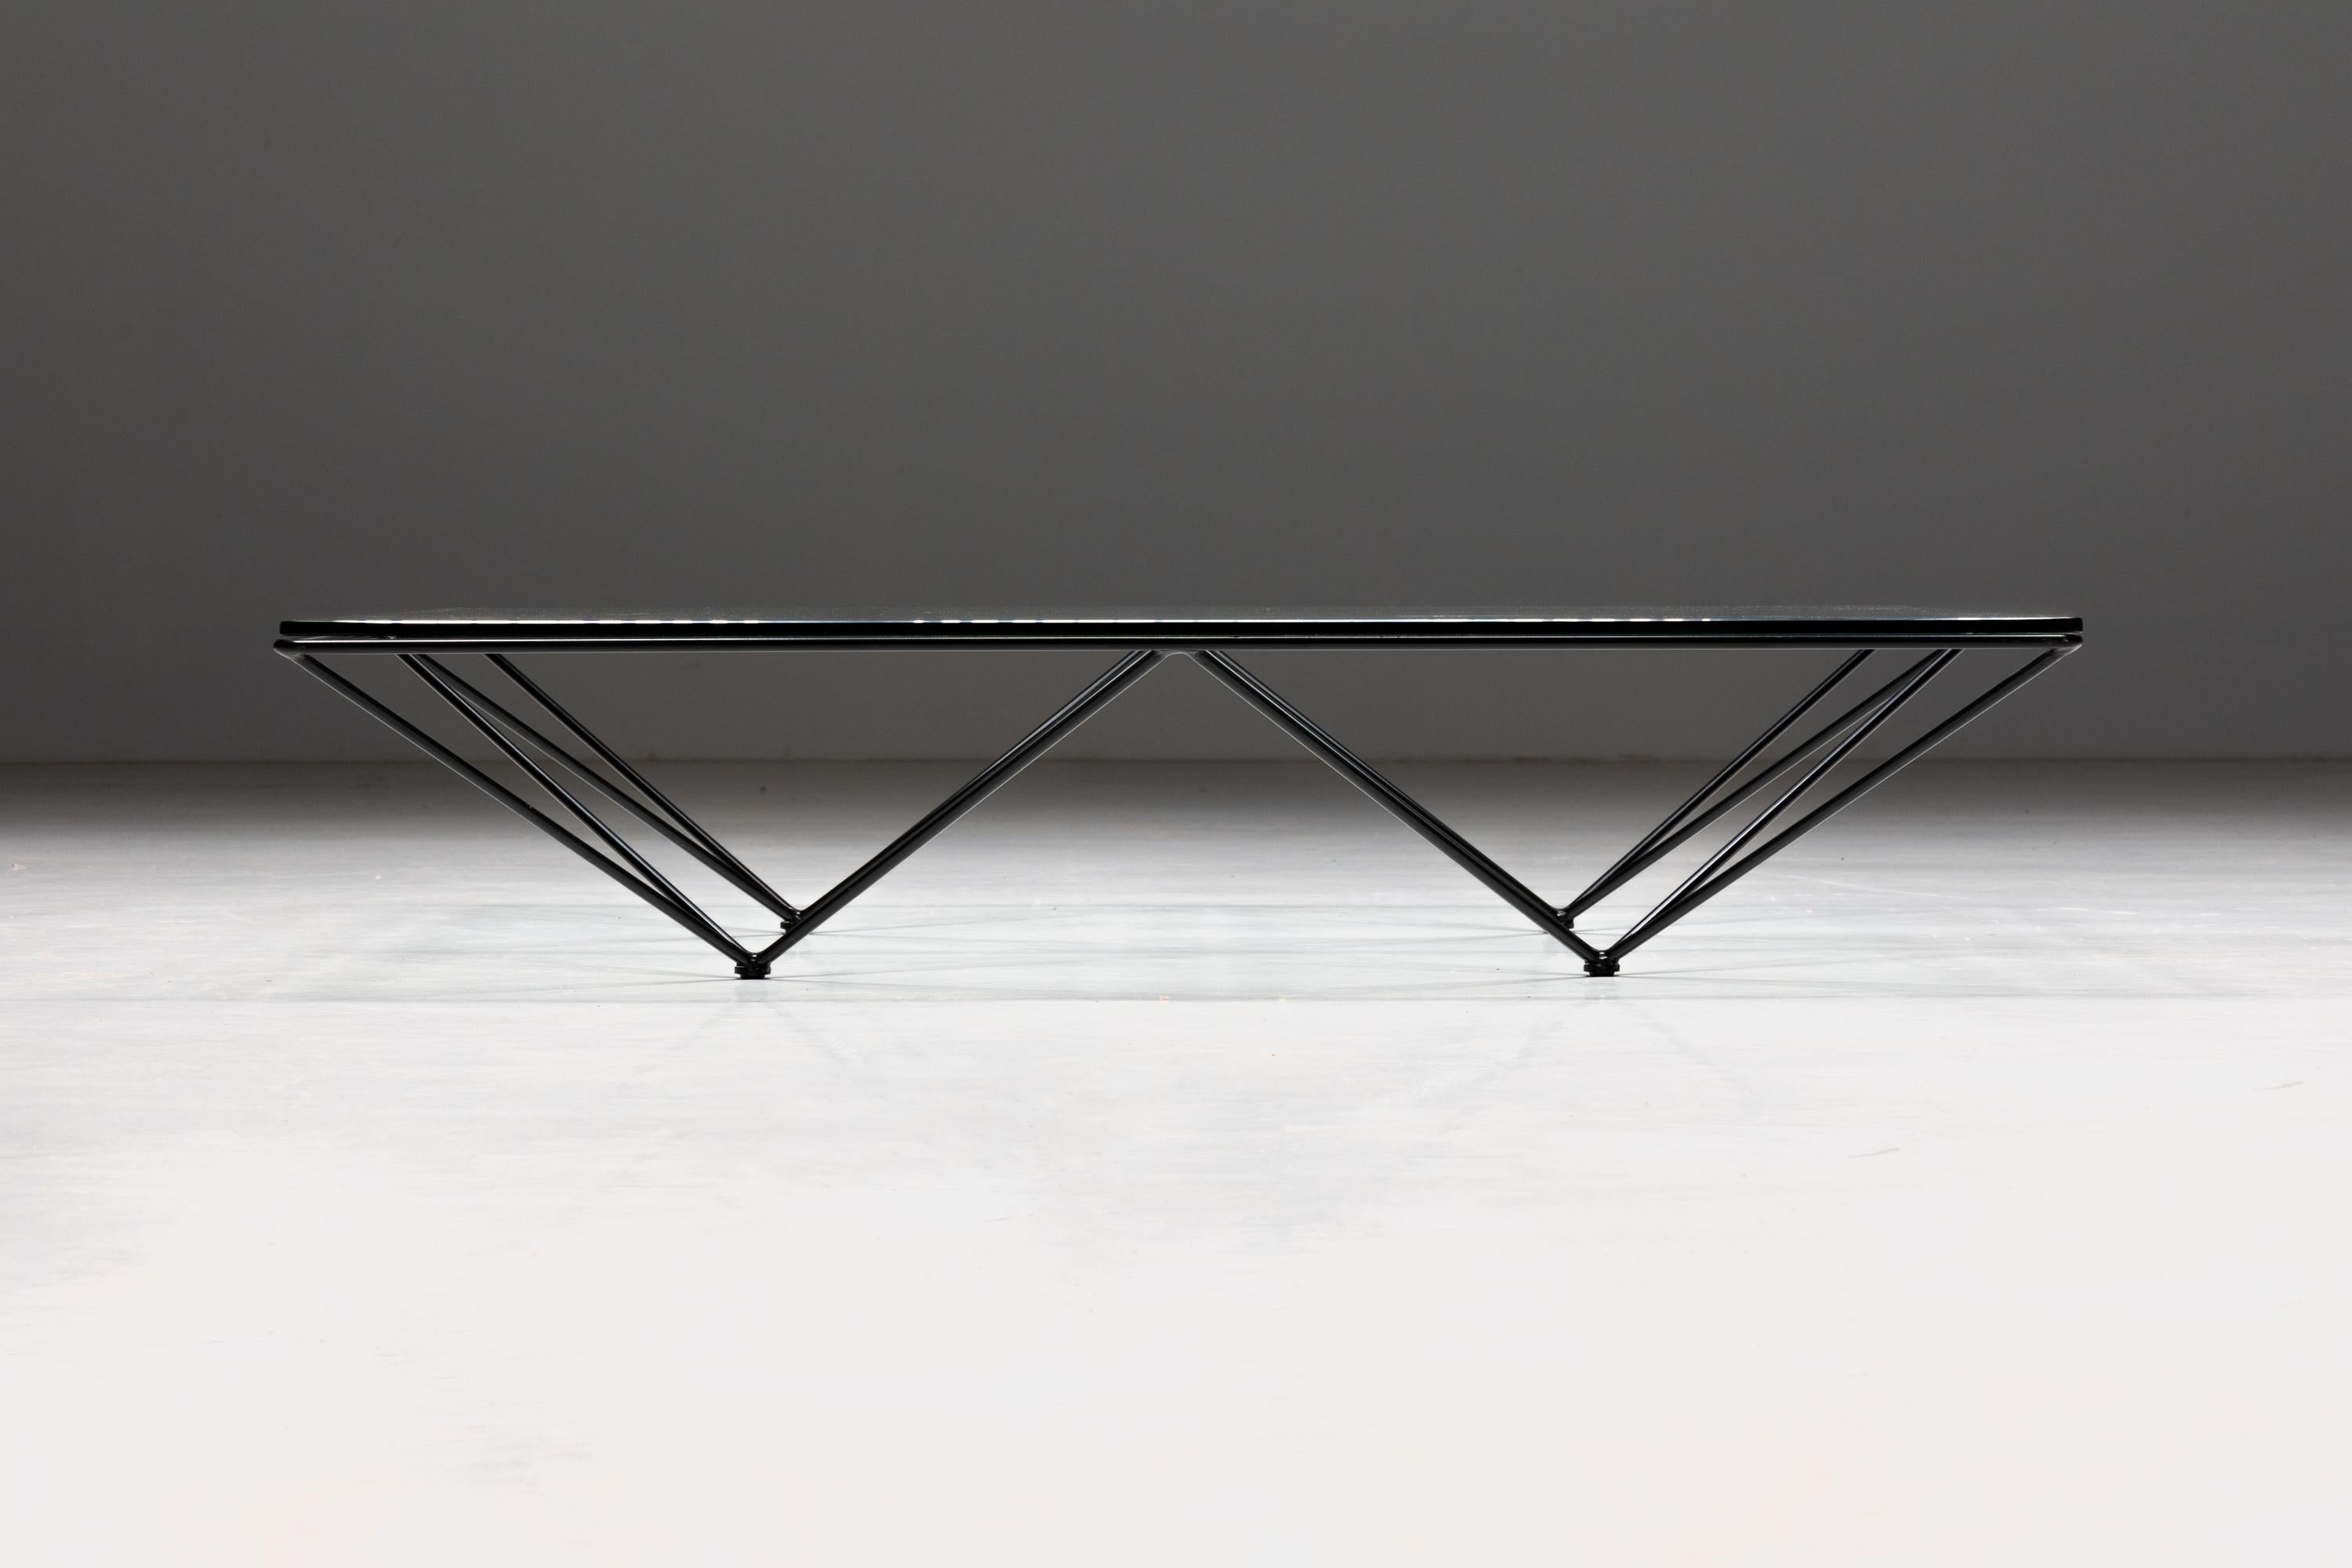 Alanda; Paolo Piva; 1980s; Italy; B&B Italia; coffee table; Modern Design; Late 19th century; Glass; Steel; Carlo Scarpa; 

Alanda coffee table by Paolo Piva for B&B Italia. one of Italian designer Piva's most famous pieces, also called the 